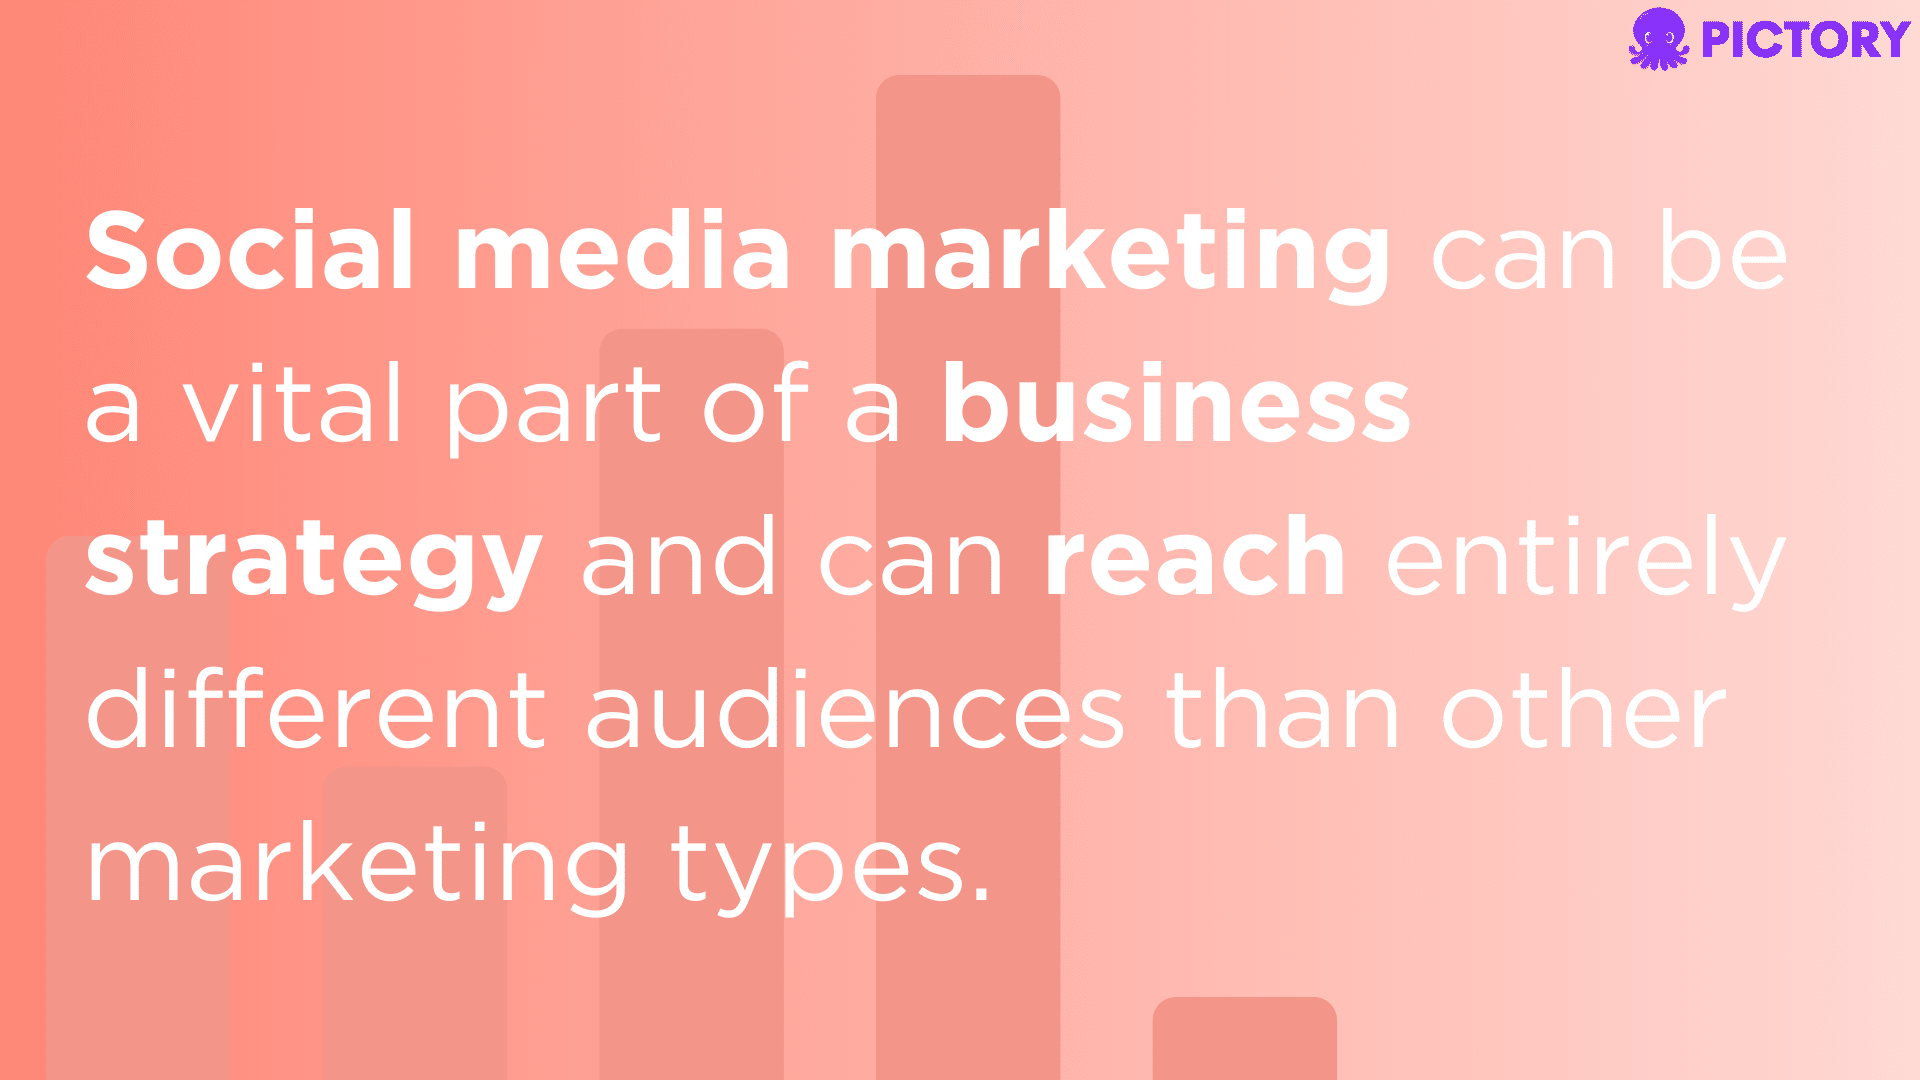 Social media marketing can be a vital part of a business strategy and can reach entirely different audiences than other marketing types.